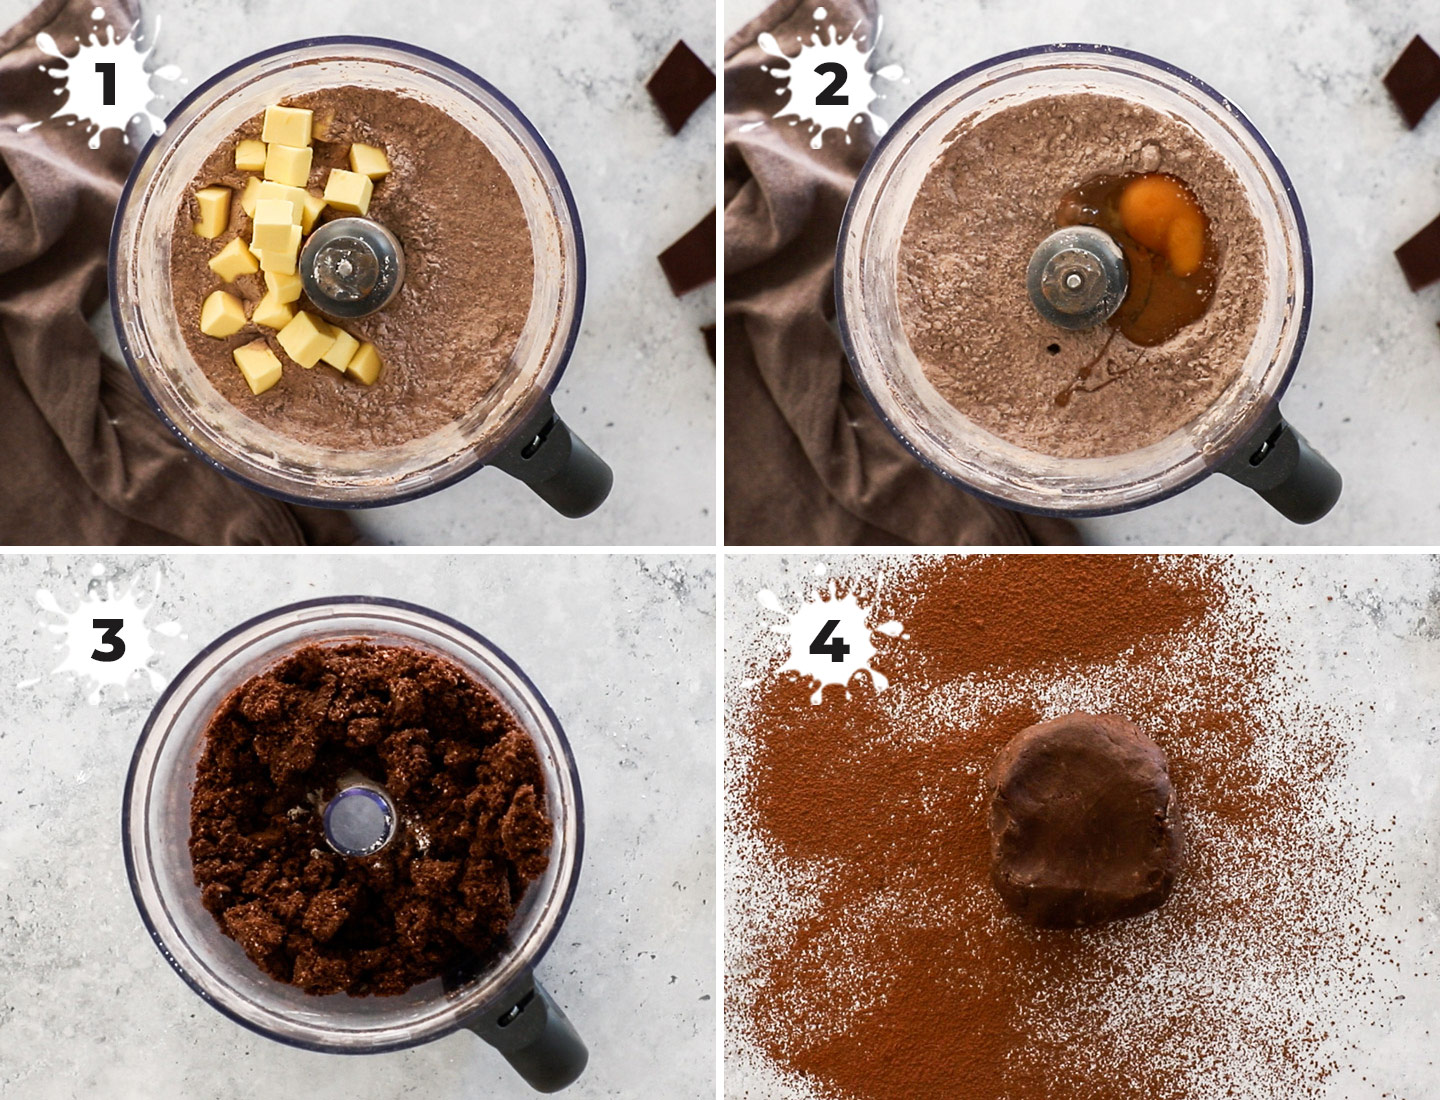 A collage showing how to make the chocolate pastry dough.